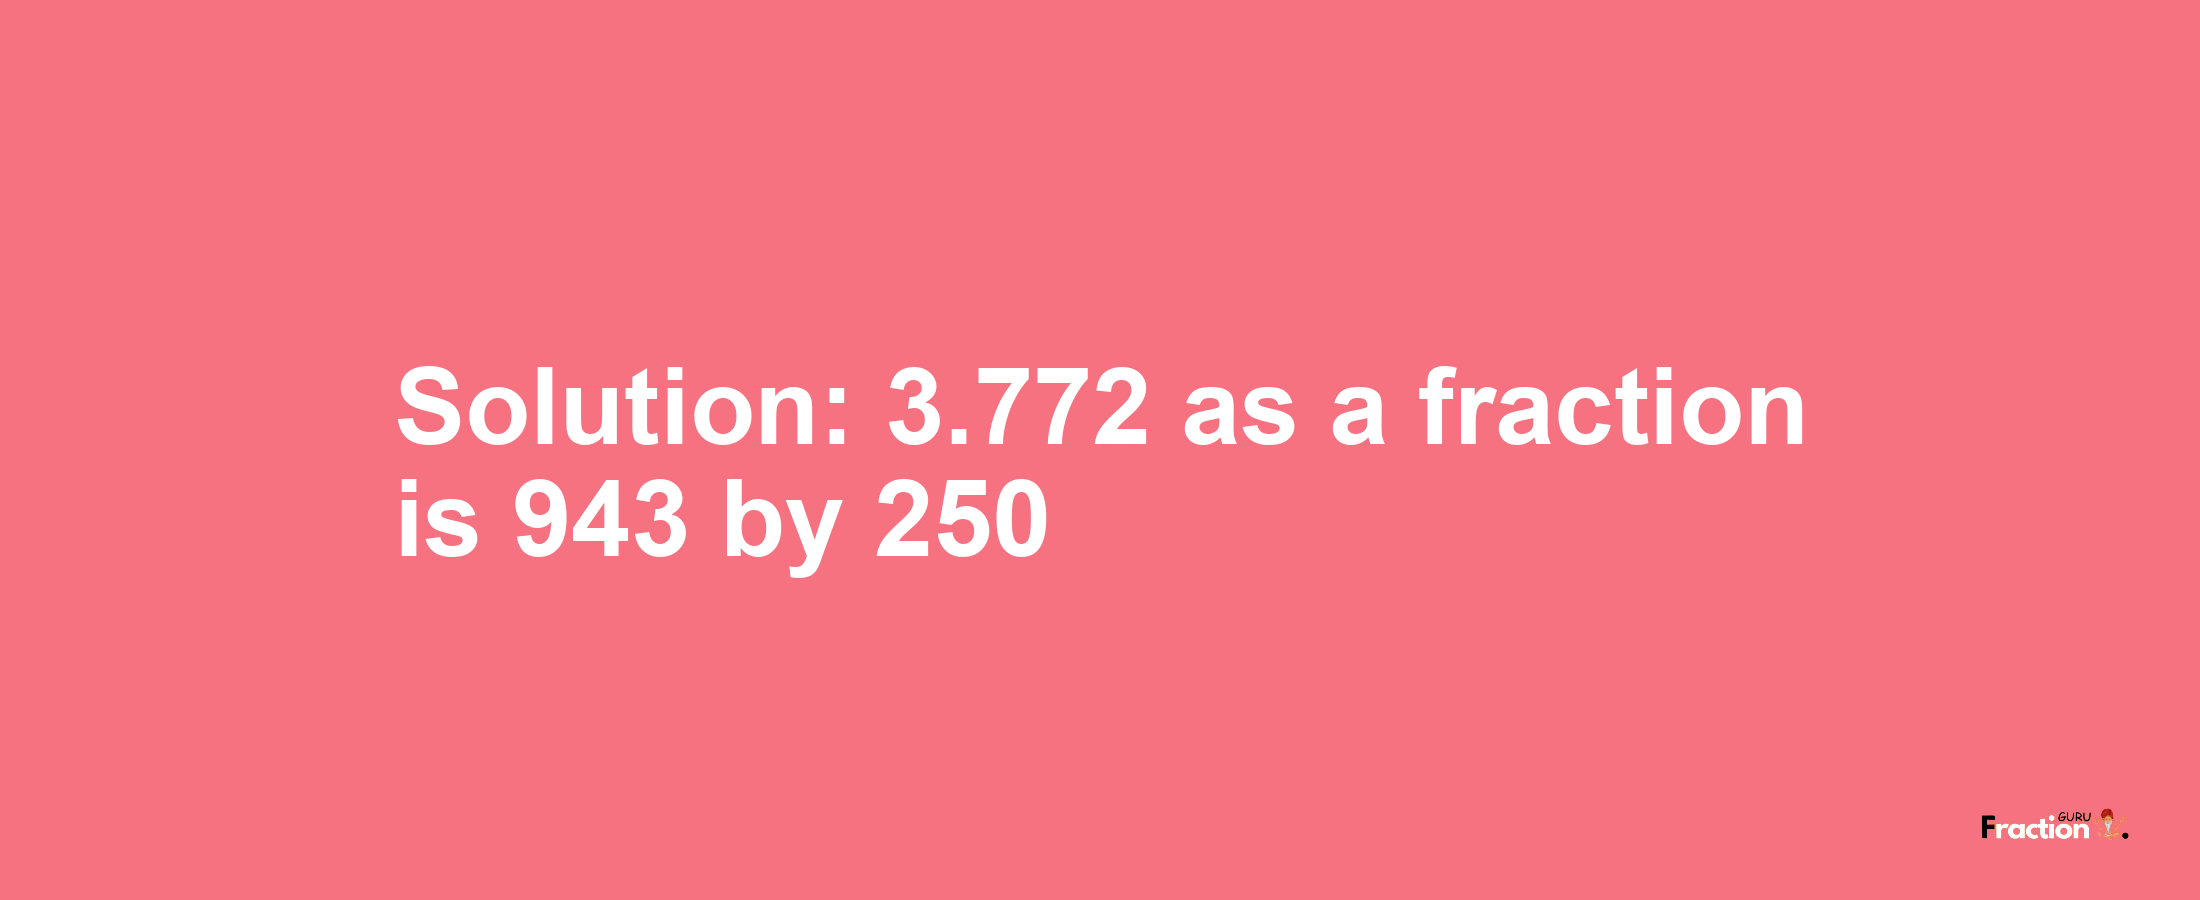 Solution:3.772 as a fraction is 943/250